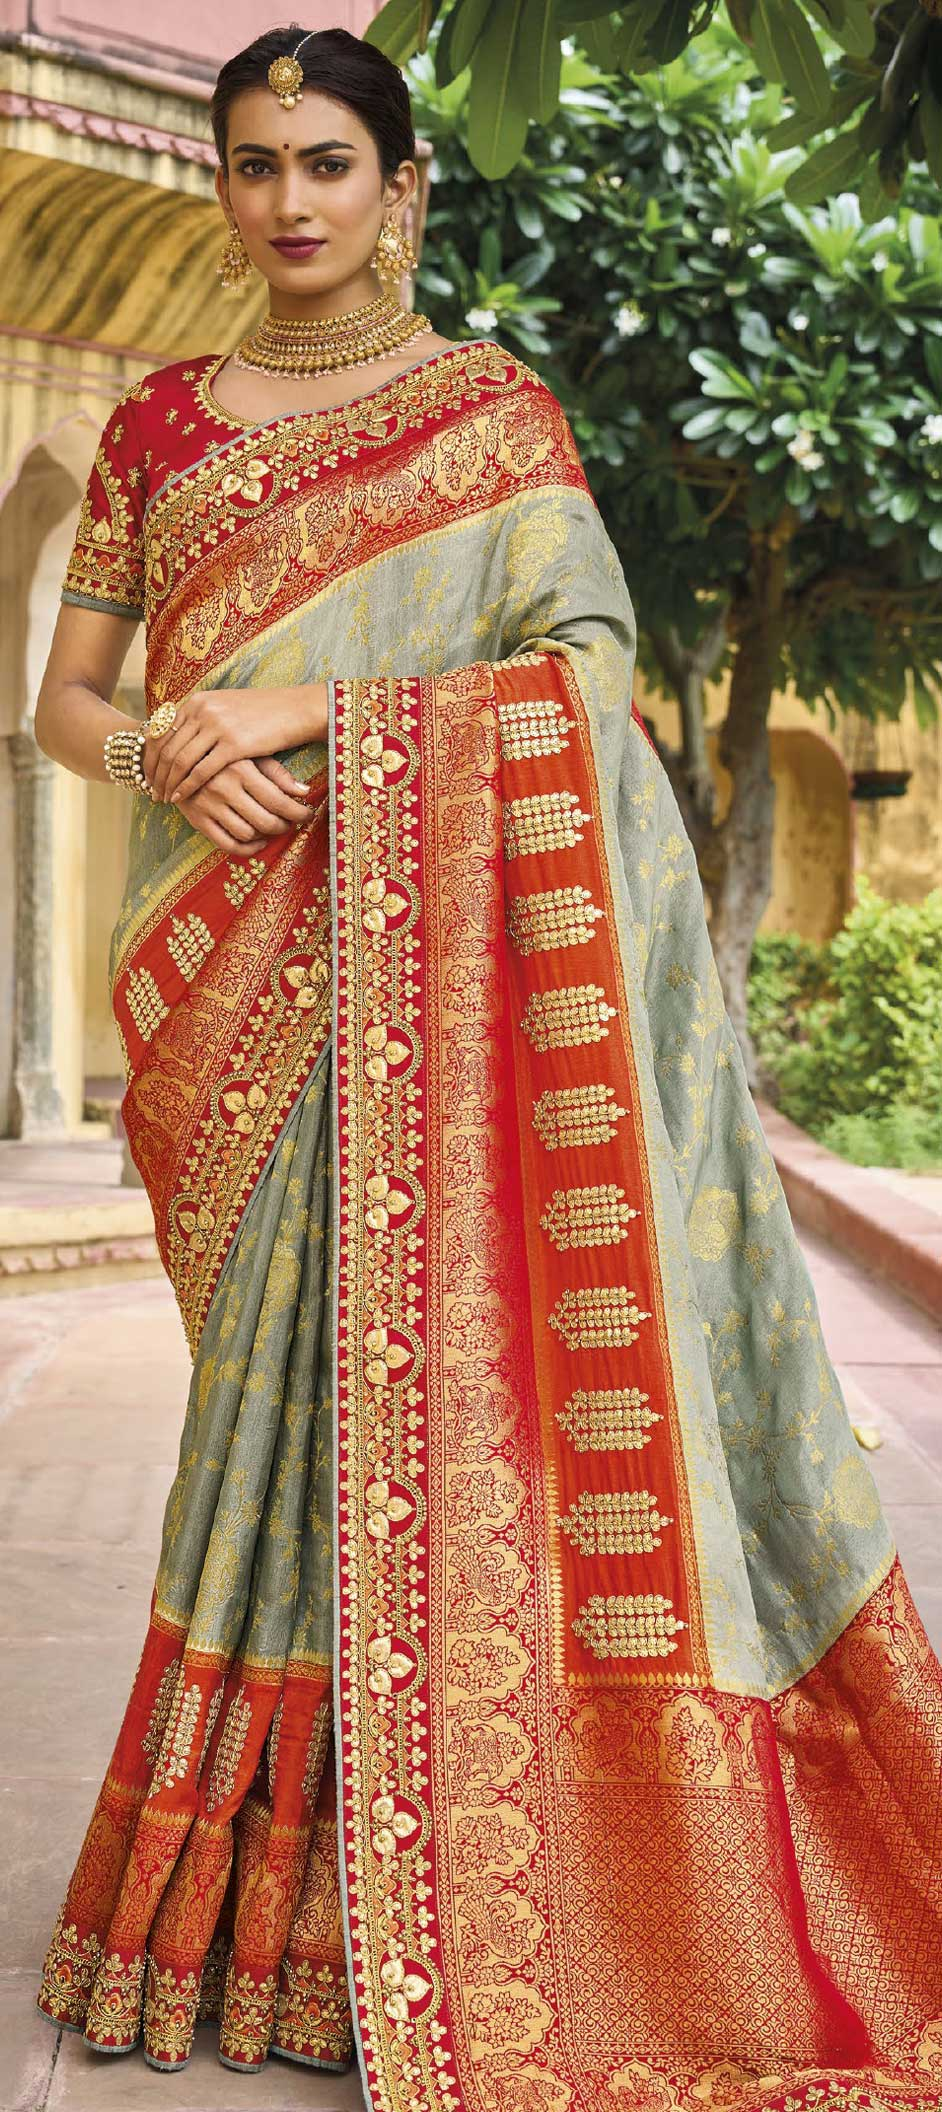 Make A Statement and Look Stunning - Best Saree Style Ideas for